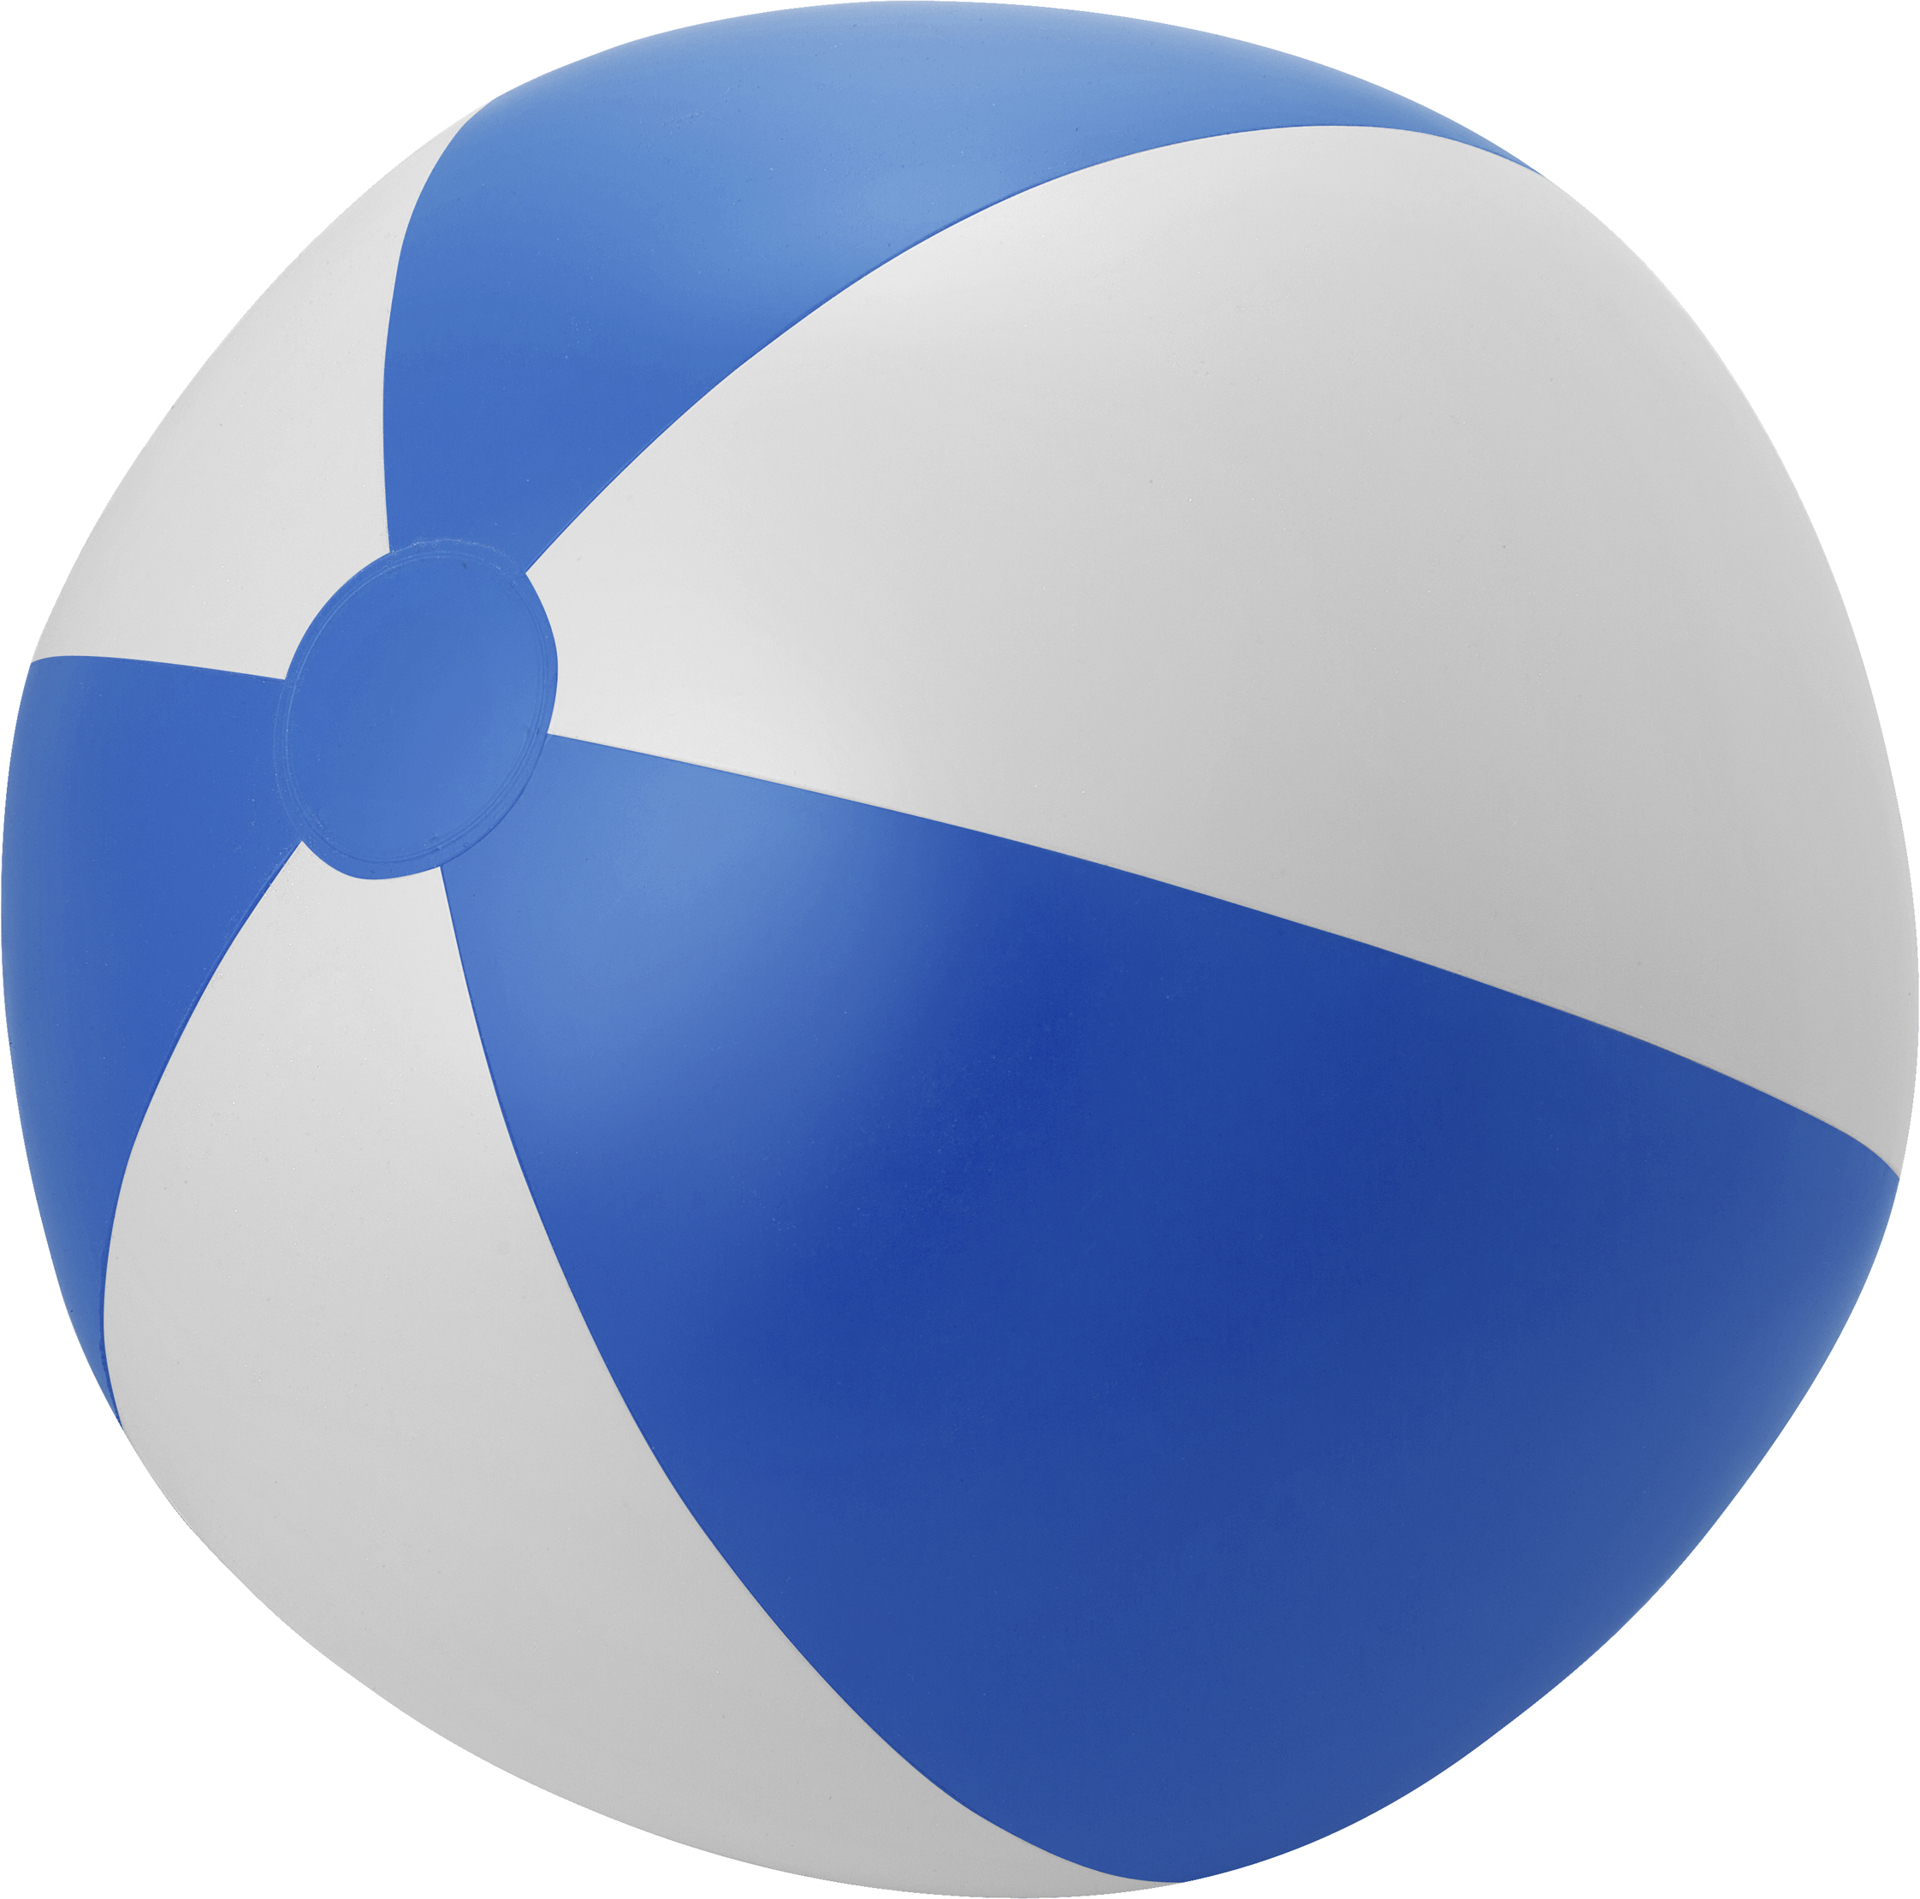 Extra Large Beach Ball in blue and white